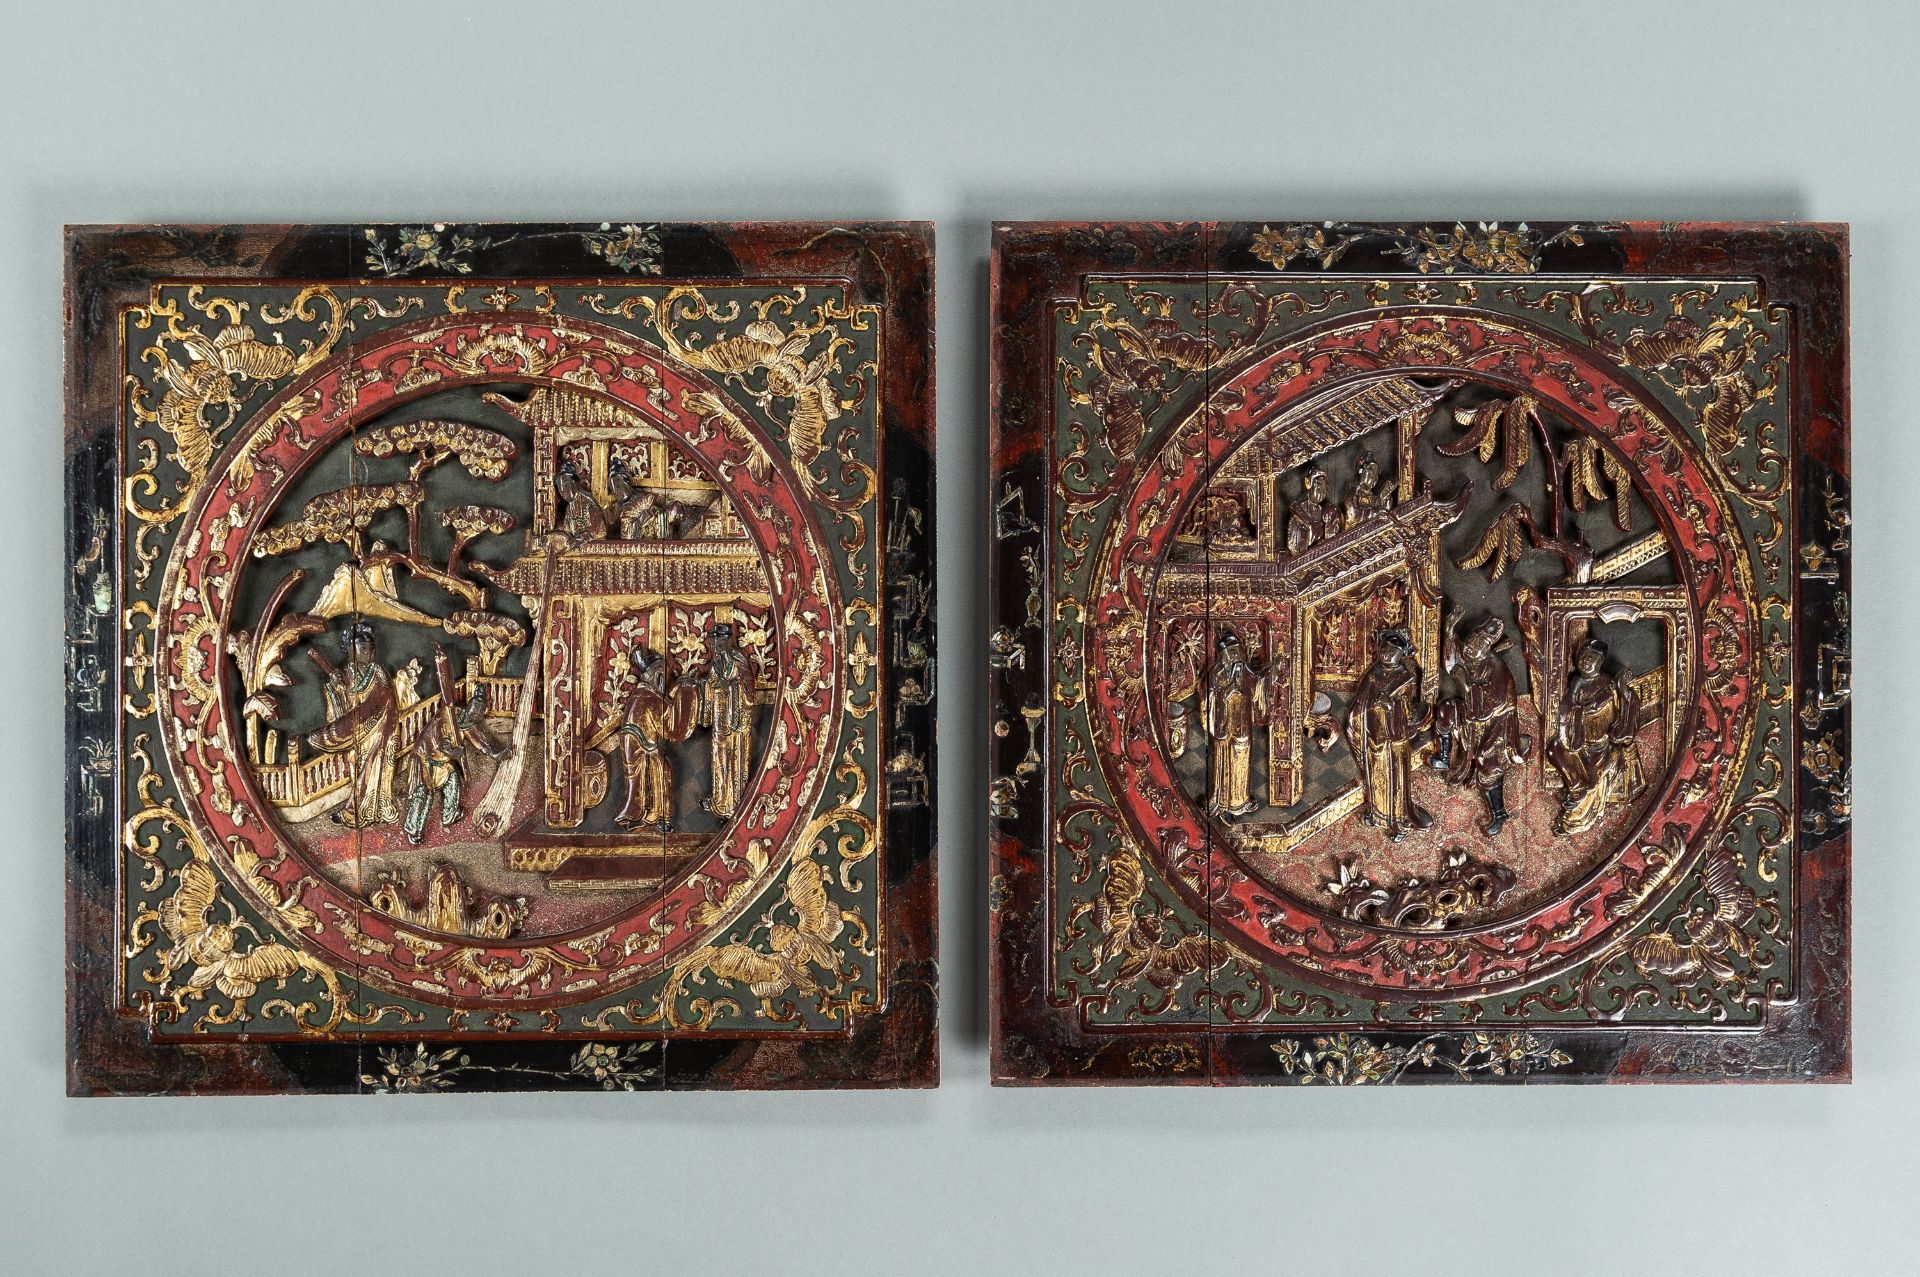 A PAIR OF LACQUERED WOOD PLAQUES